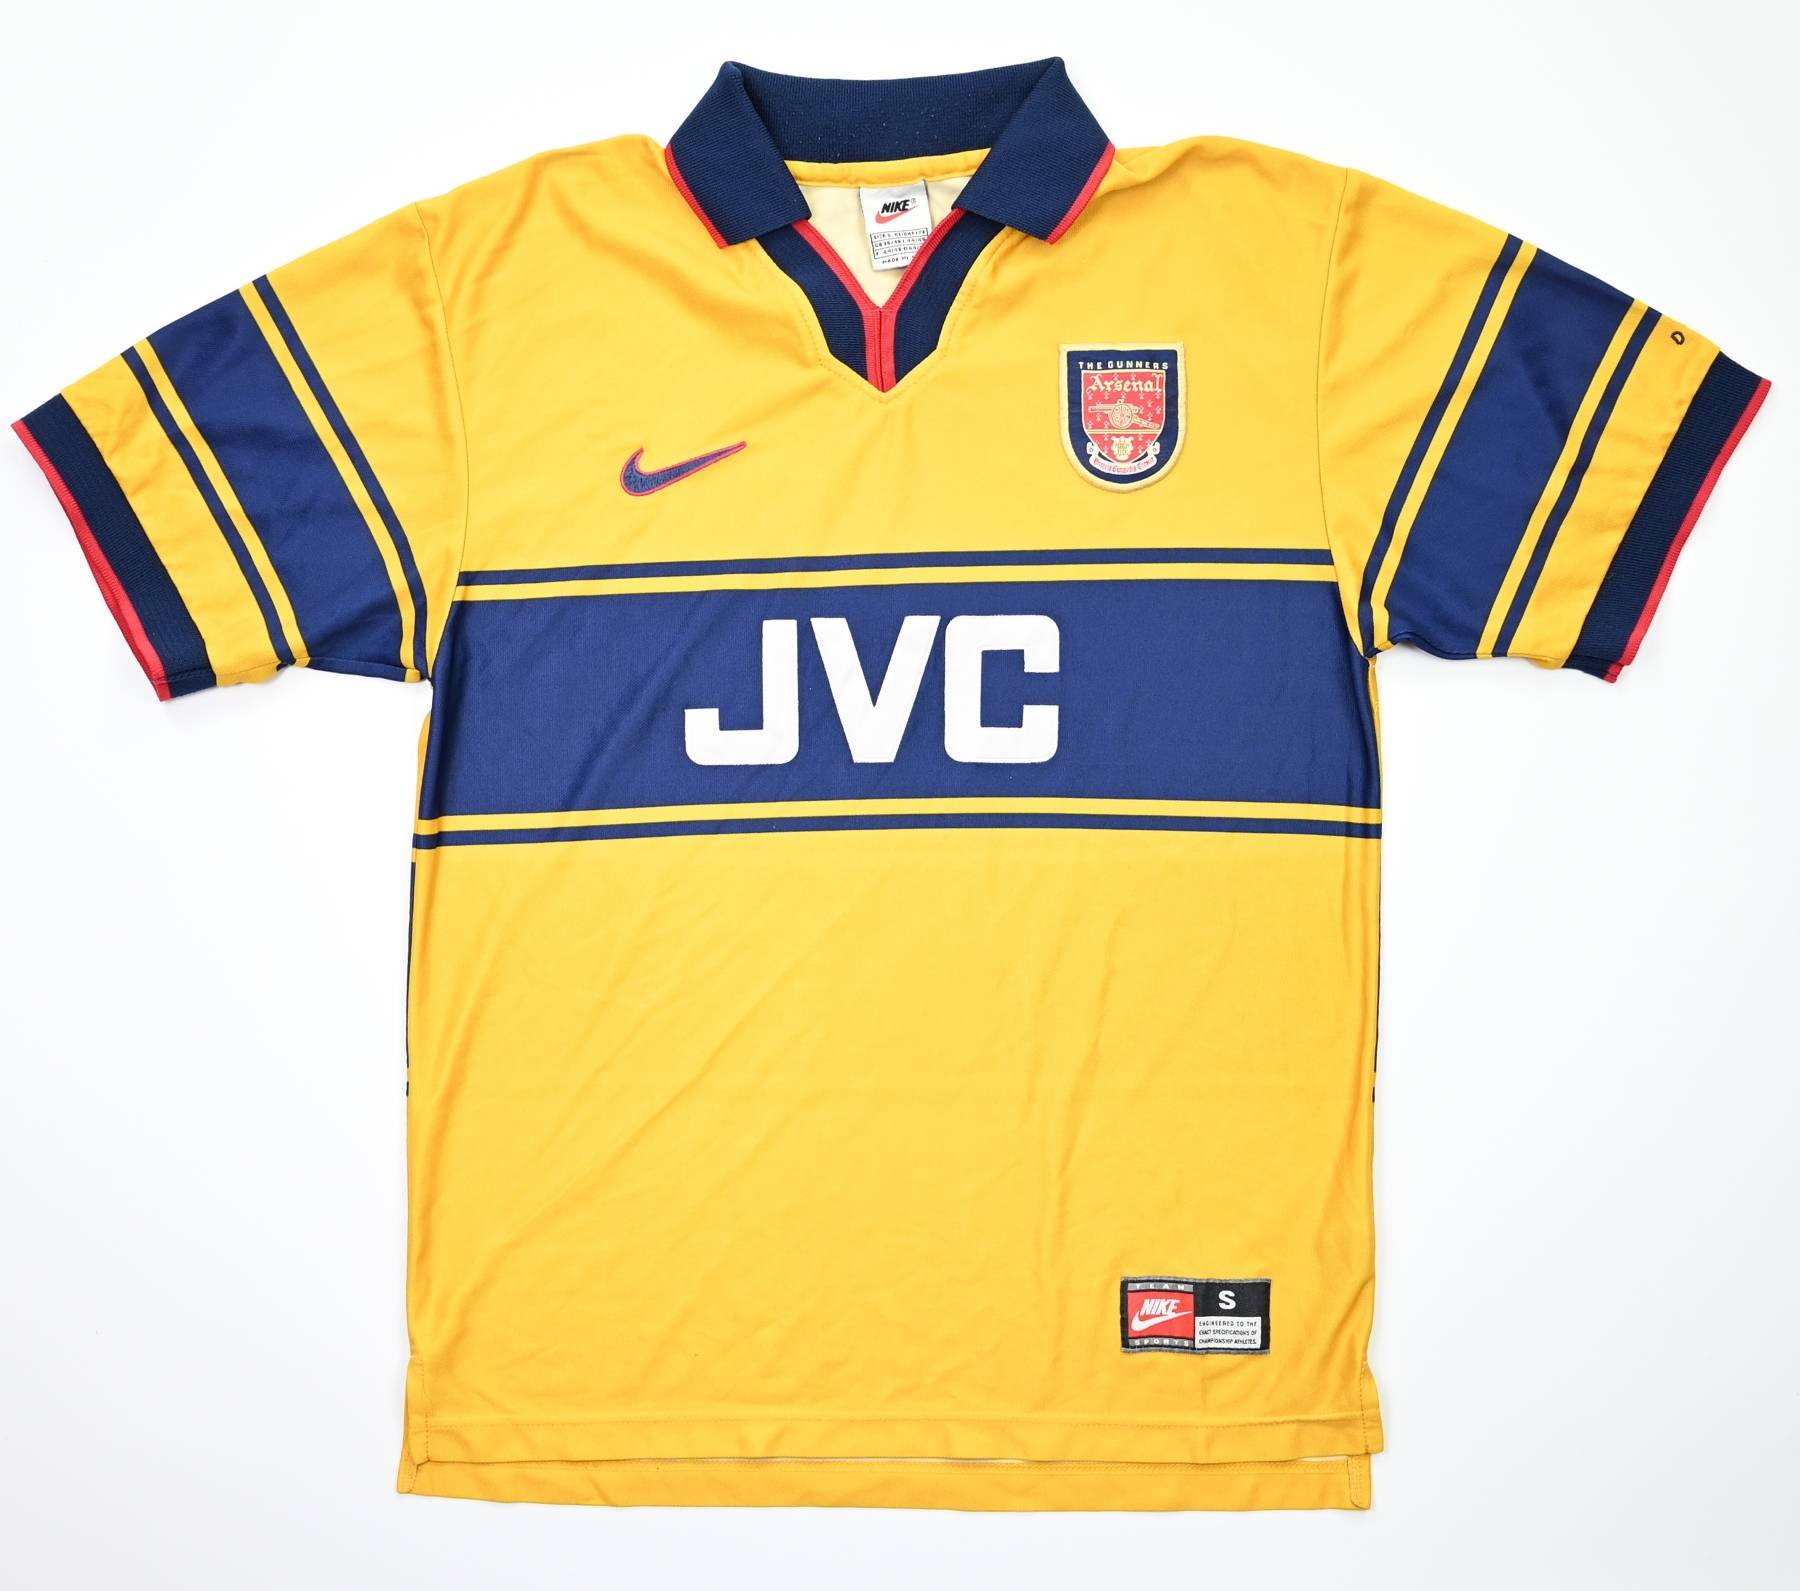 ARSENAL Maillot 1998 1999 Home Vintage Nike Made in UK JVC Premier League  Football Homme - Gabba Vintage